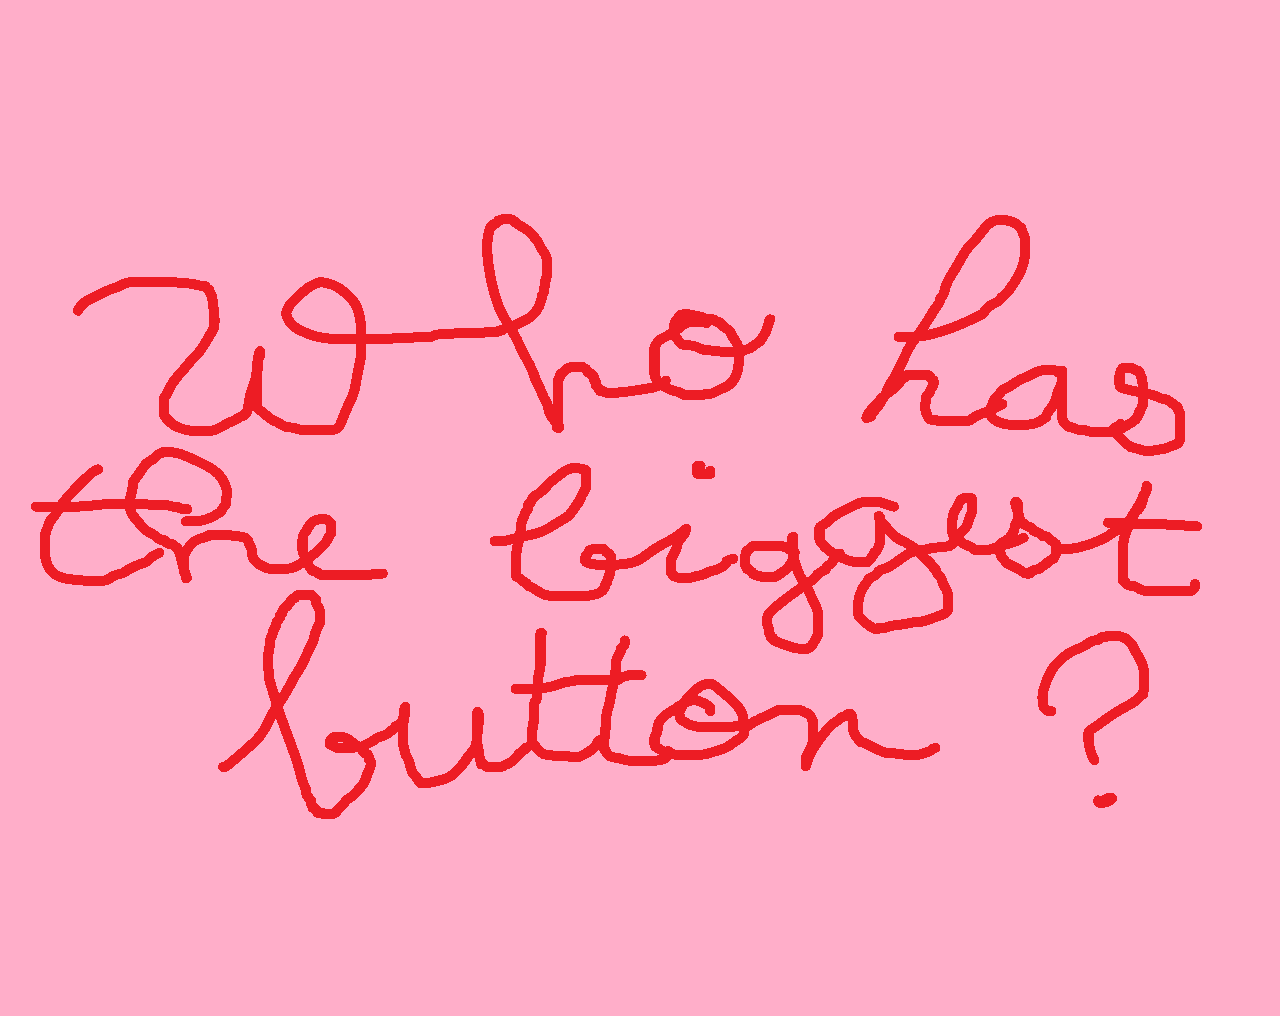 Who has the biggest button ?